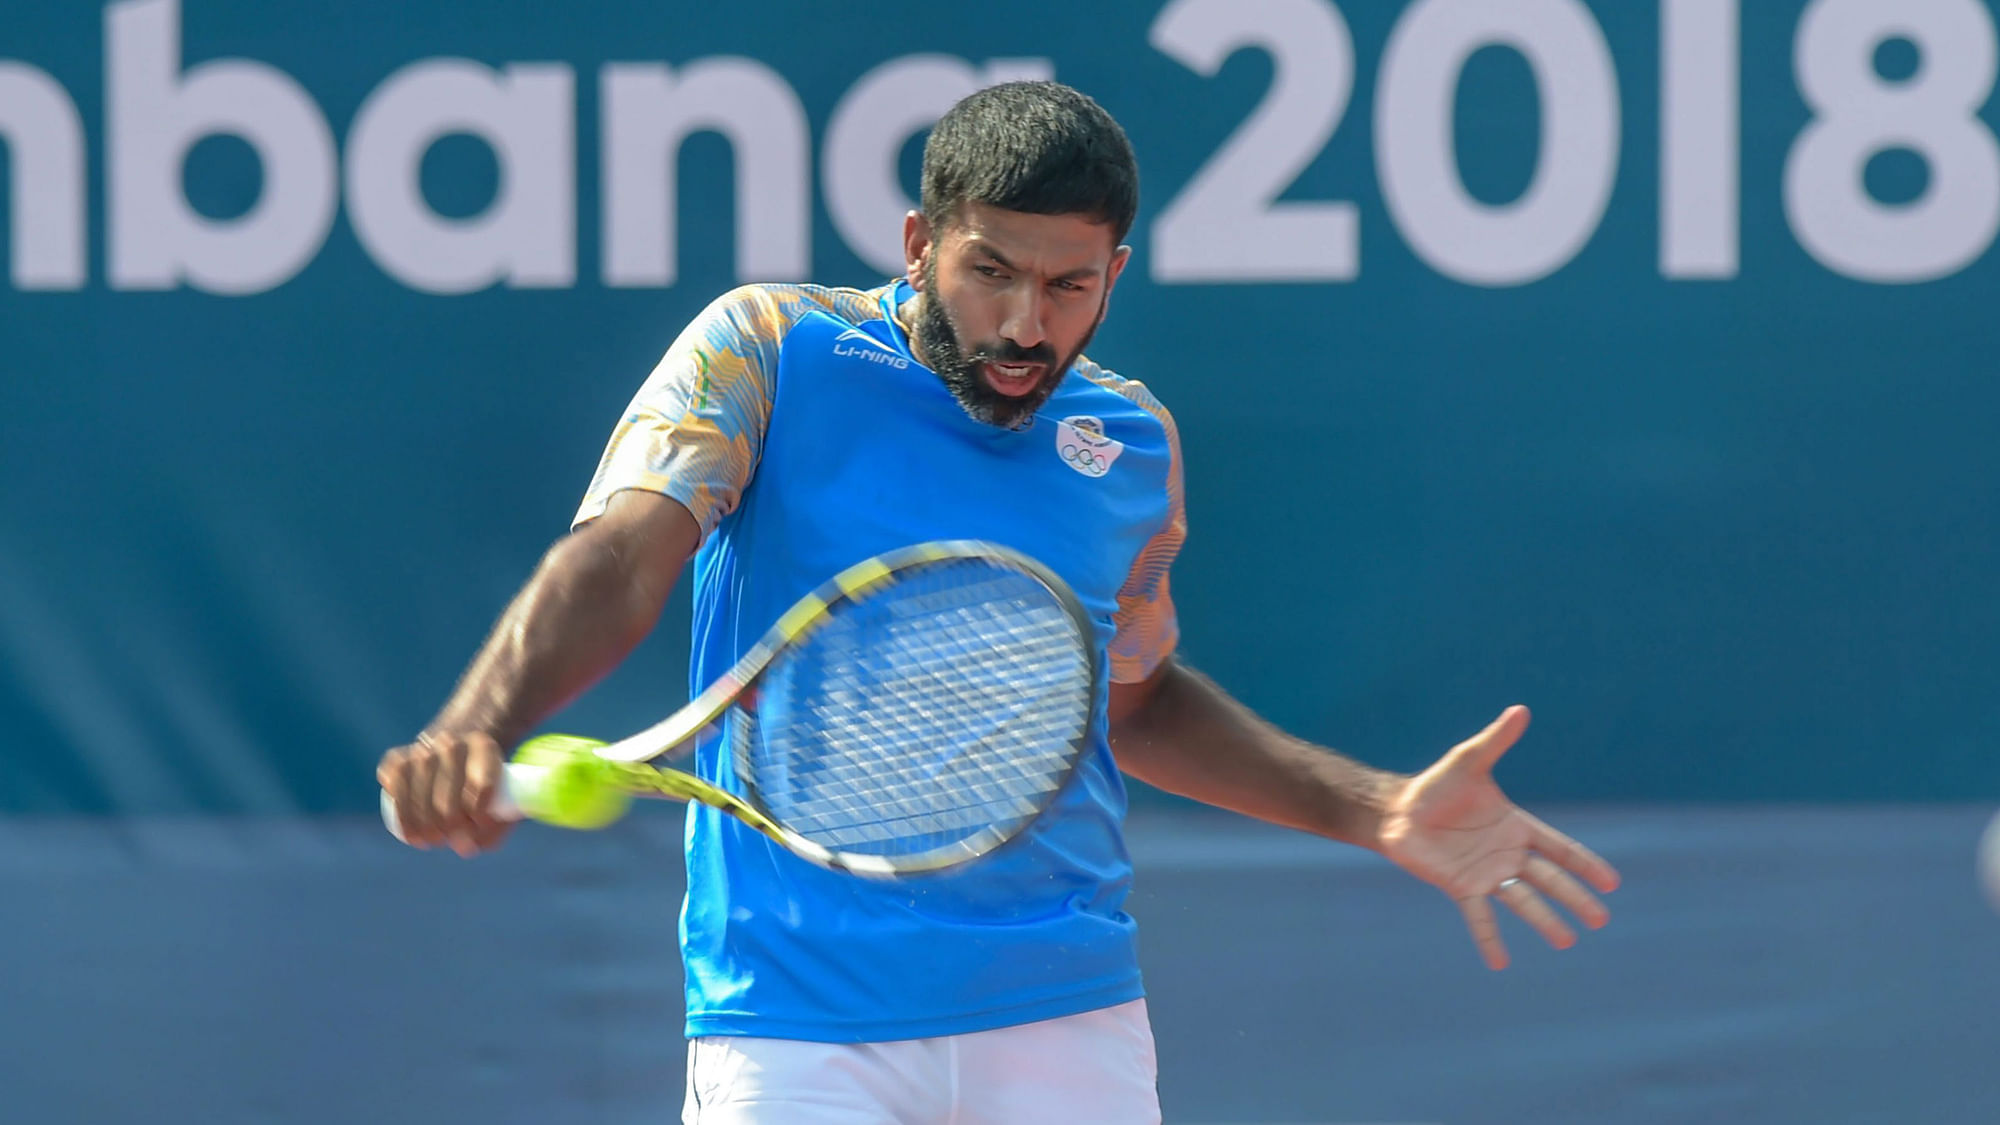 Rohan Bopanna in action. The national tennis federation decided to begin the process to procure Pakistan visas for its players and support staff.